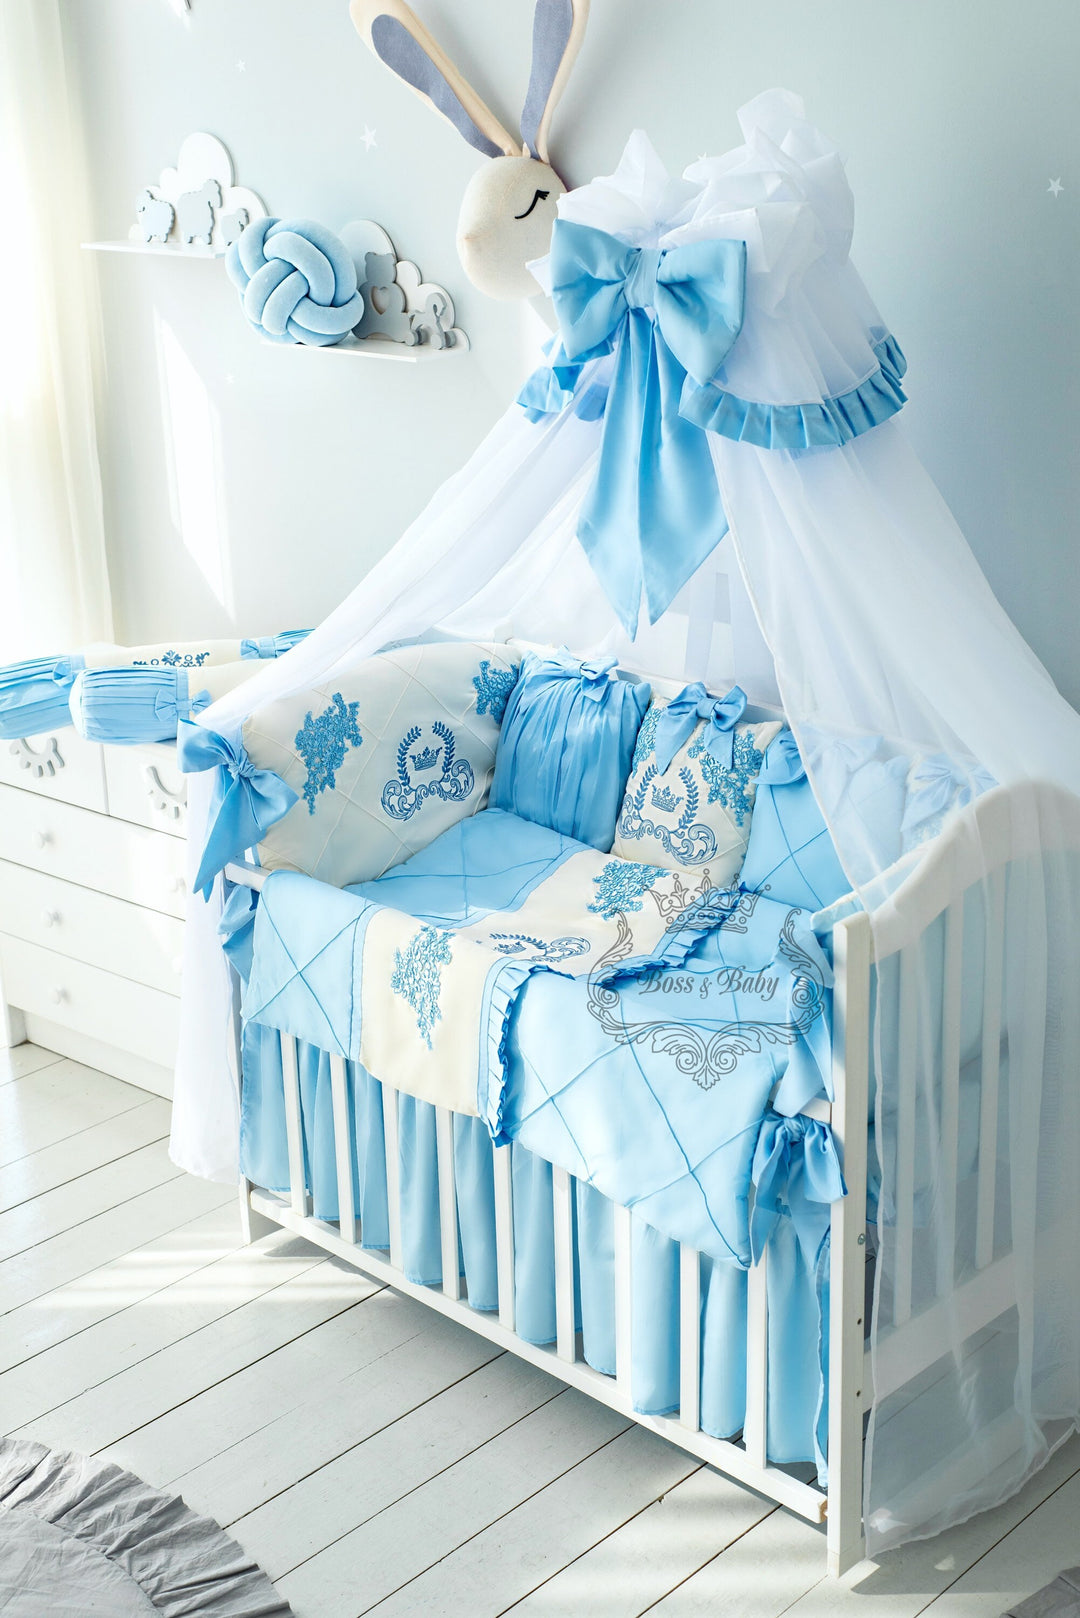 Luxury Baby Boy Crib Bedding Set in Light Blue with Personalized Name Embroidery